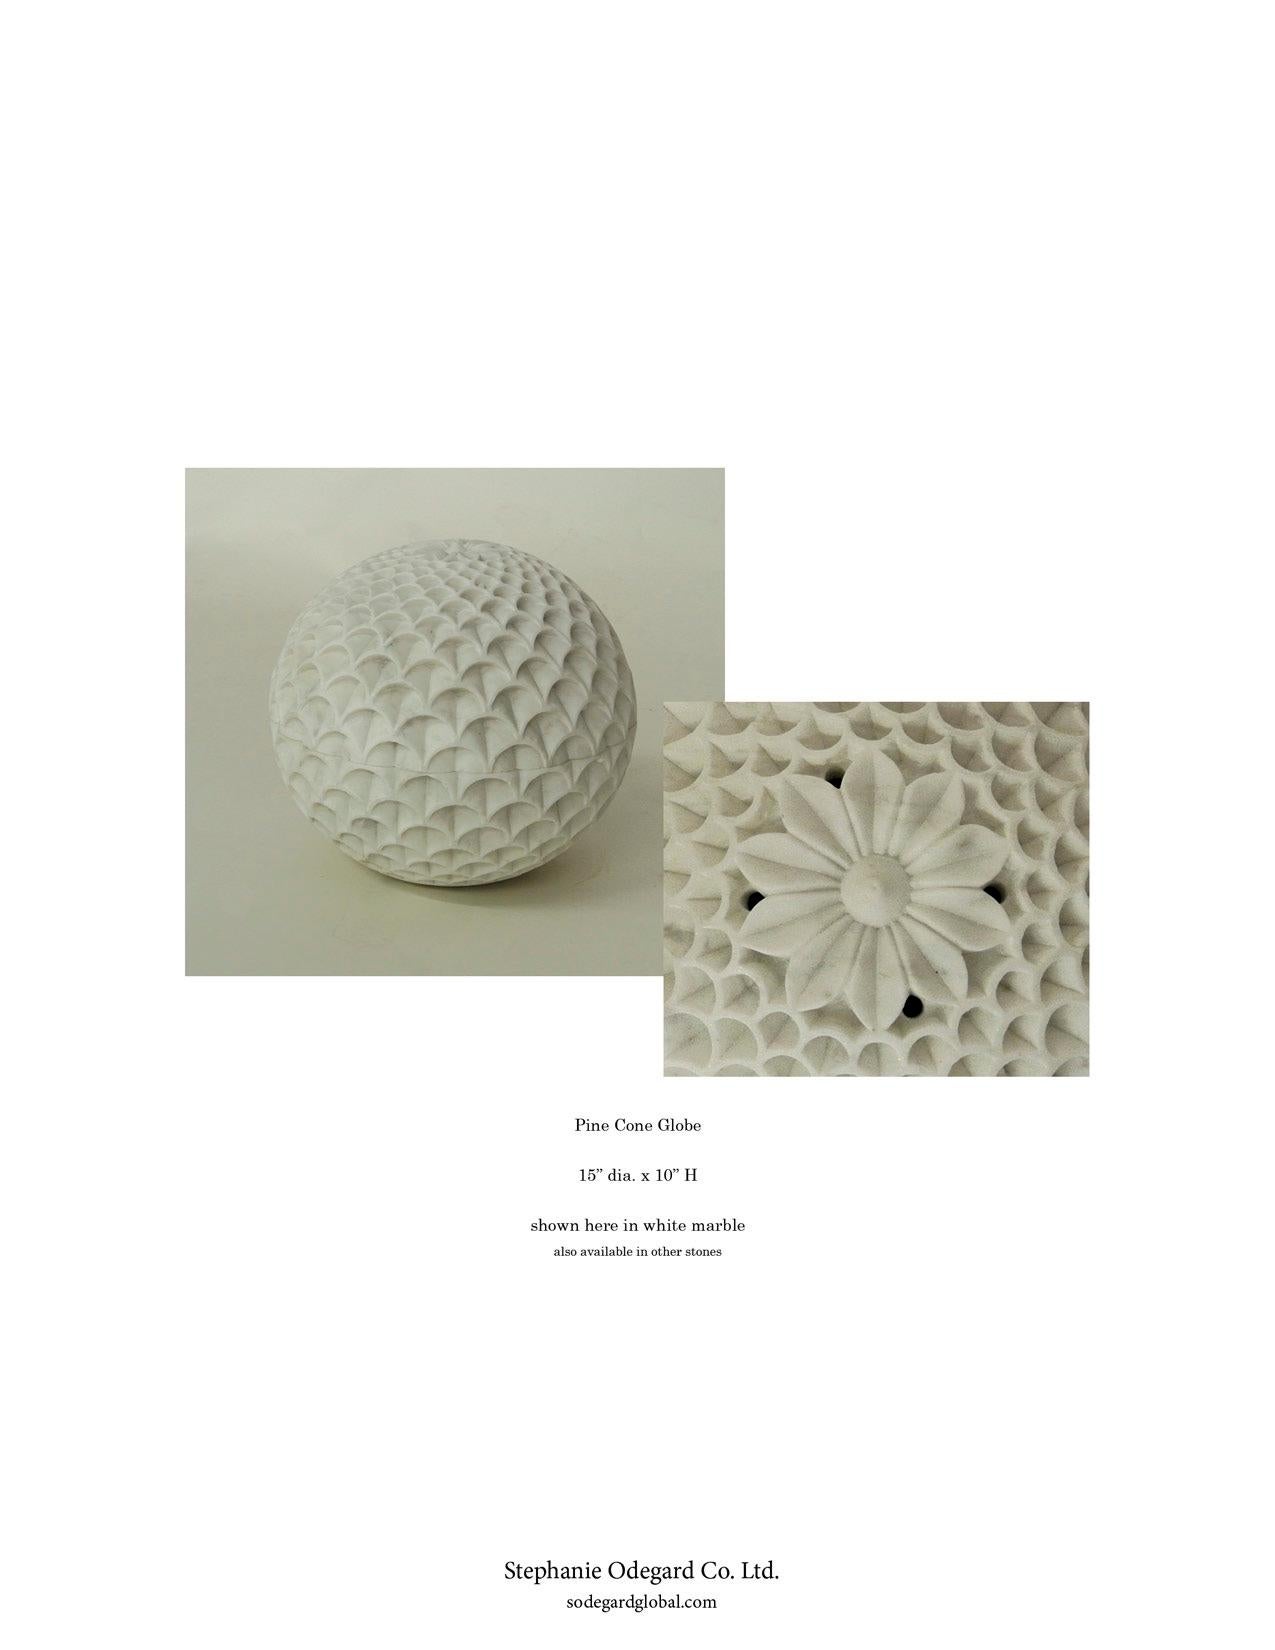 Indian Pinecone Globe in White Marble 15